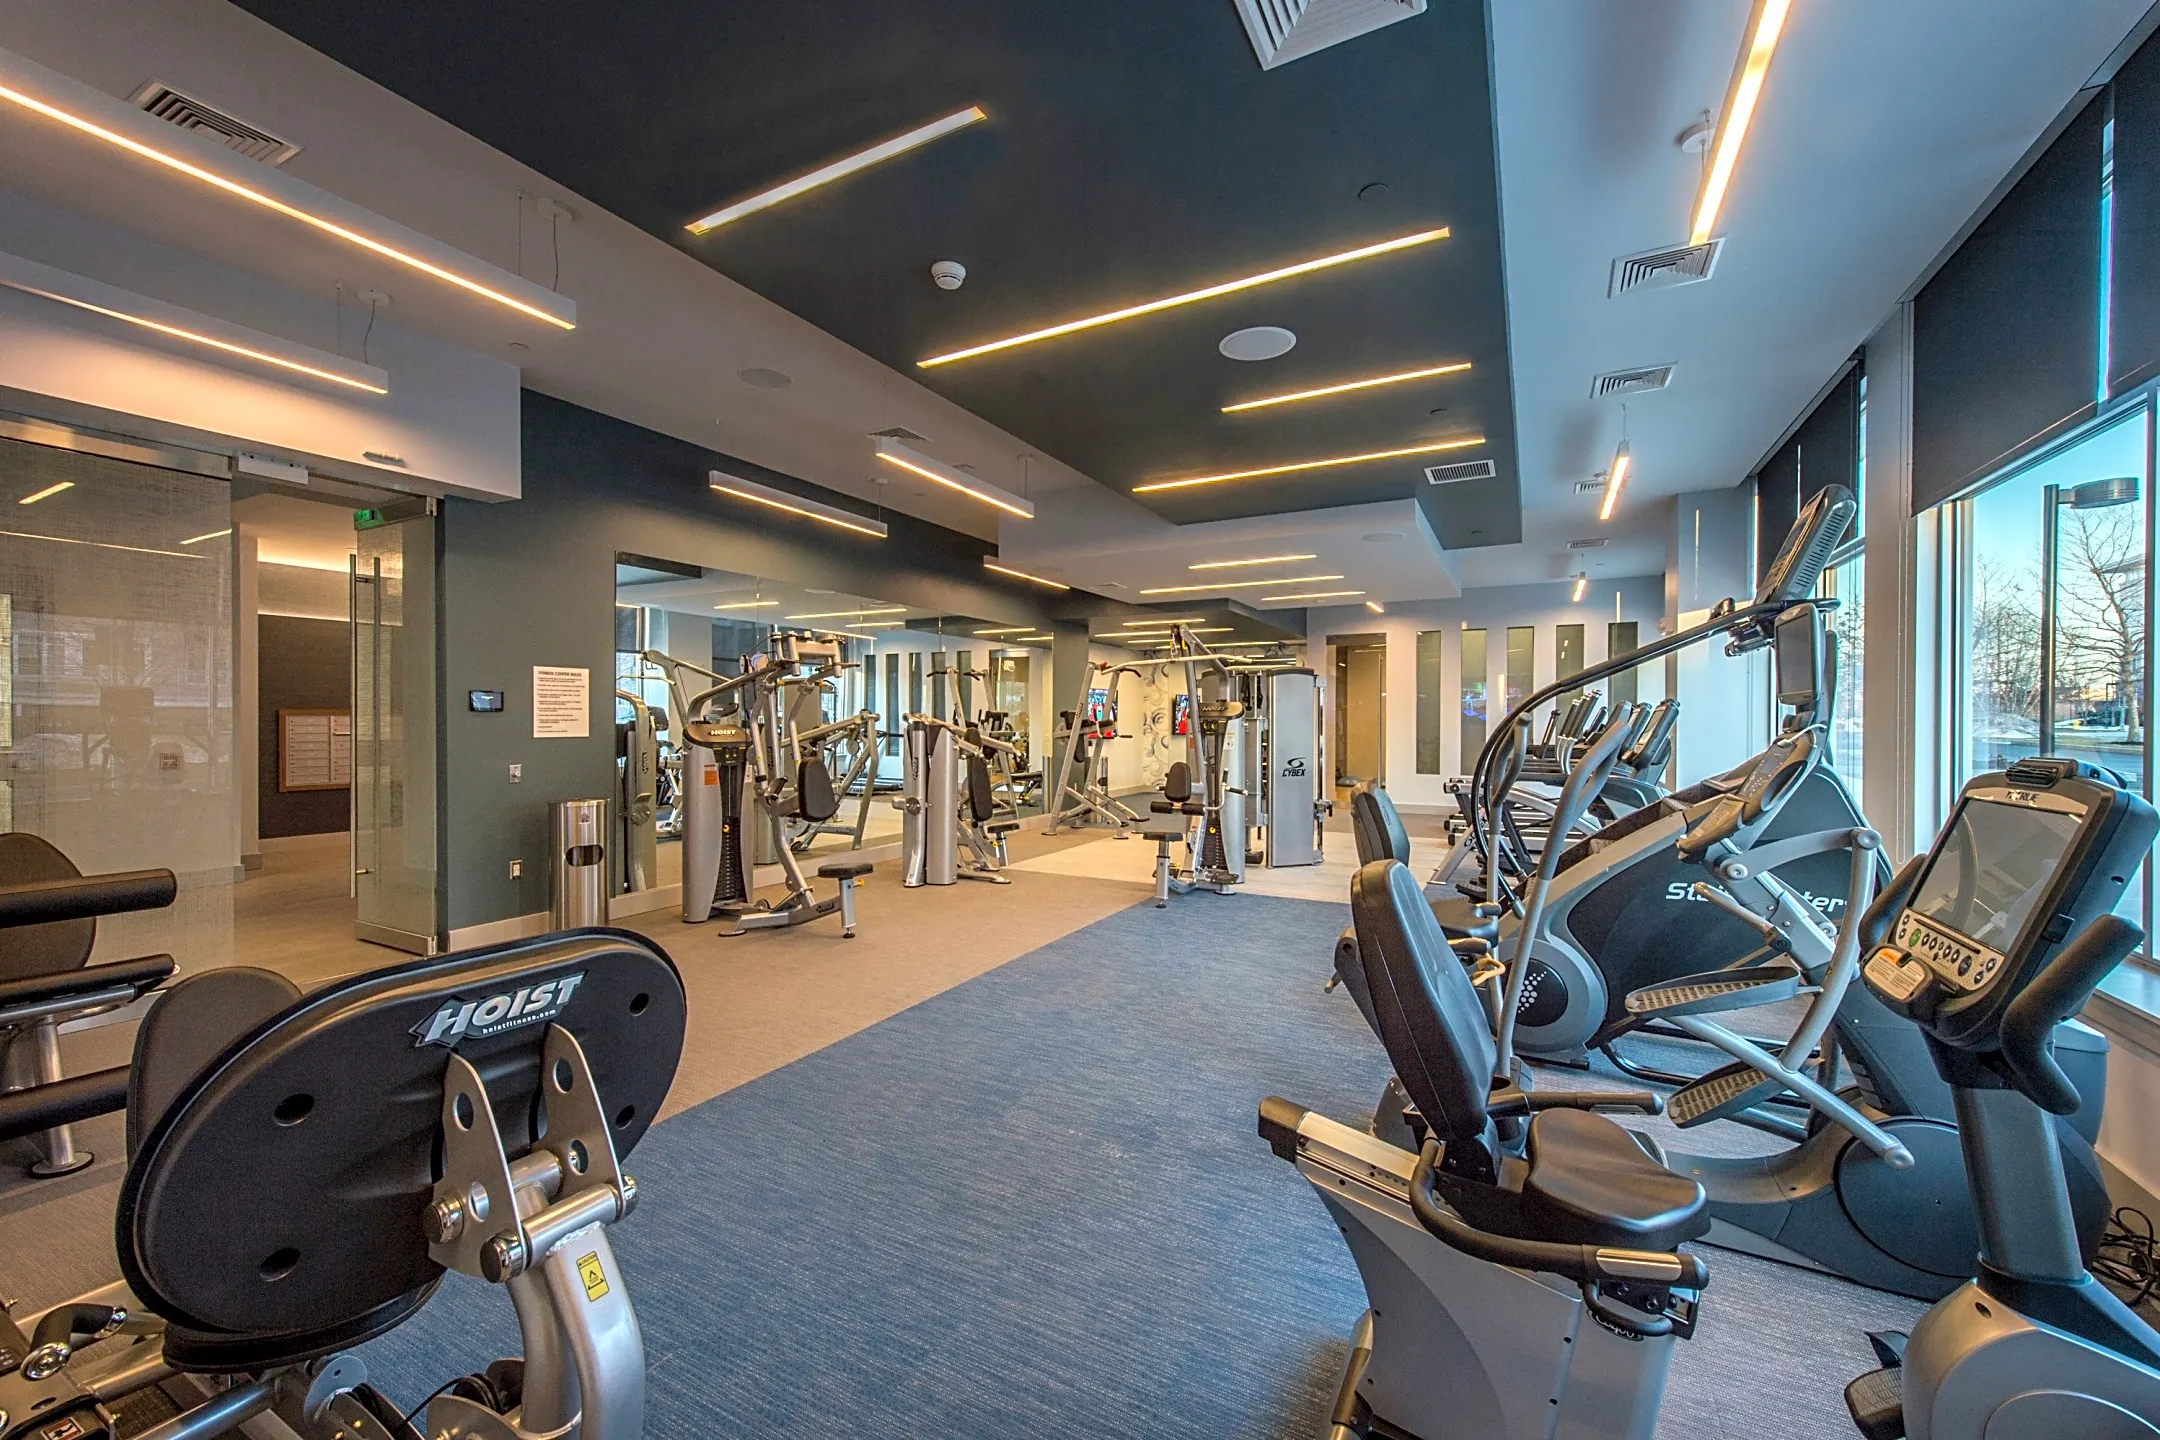 Fitness Weight Room - RE150 - Medford, MA